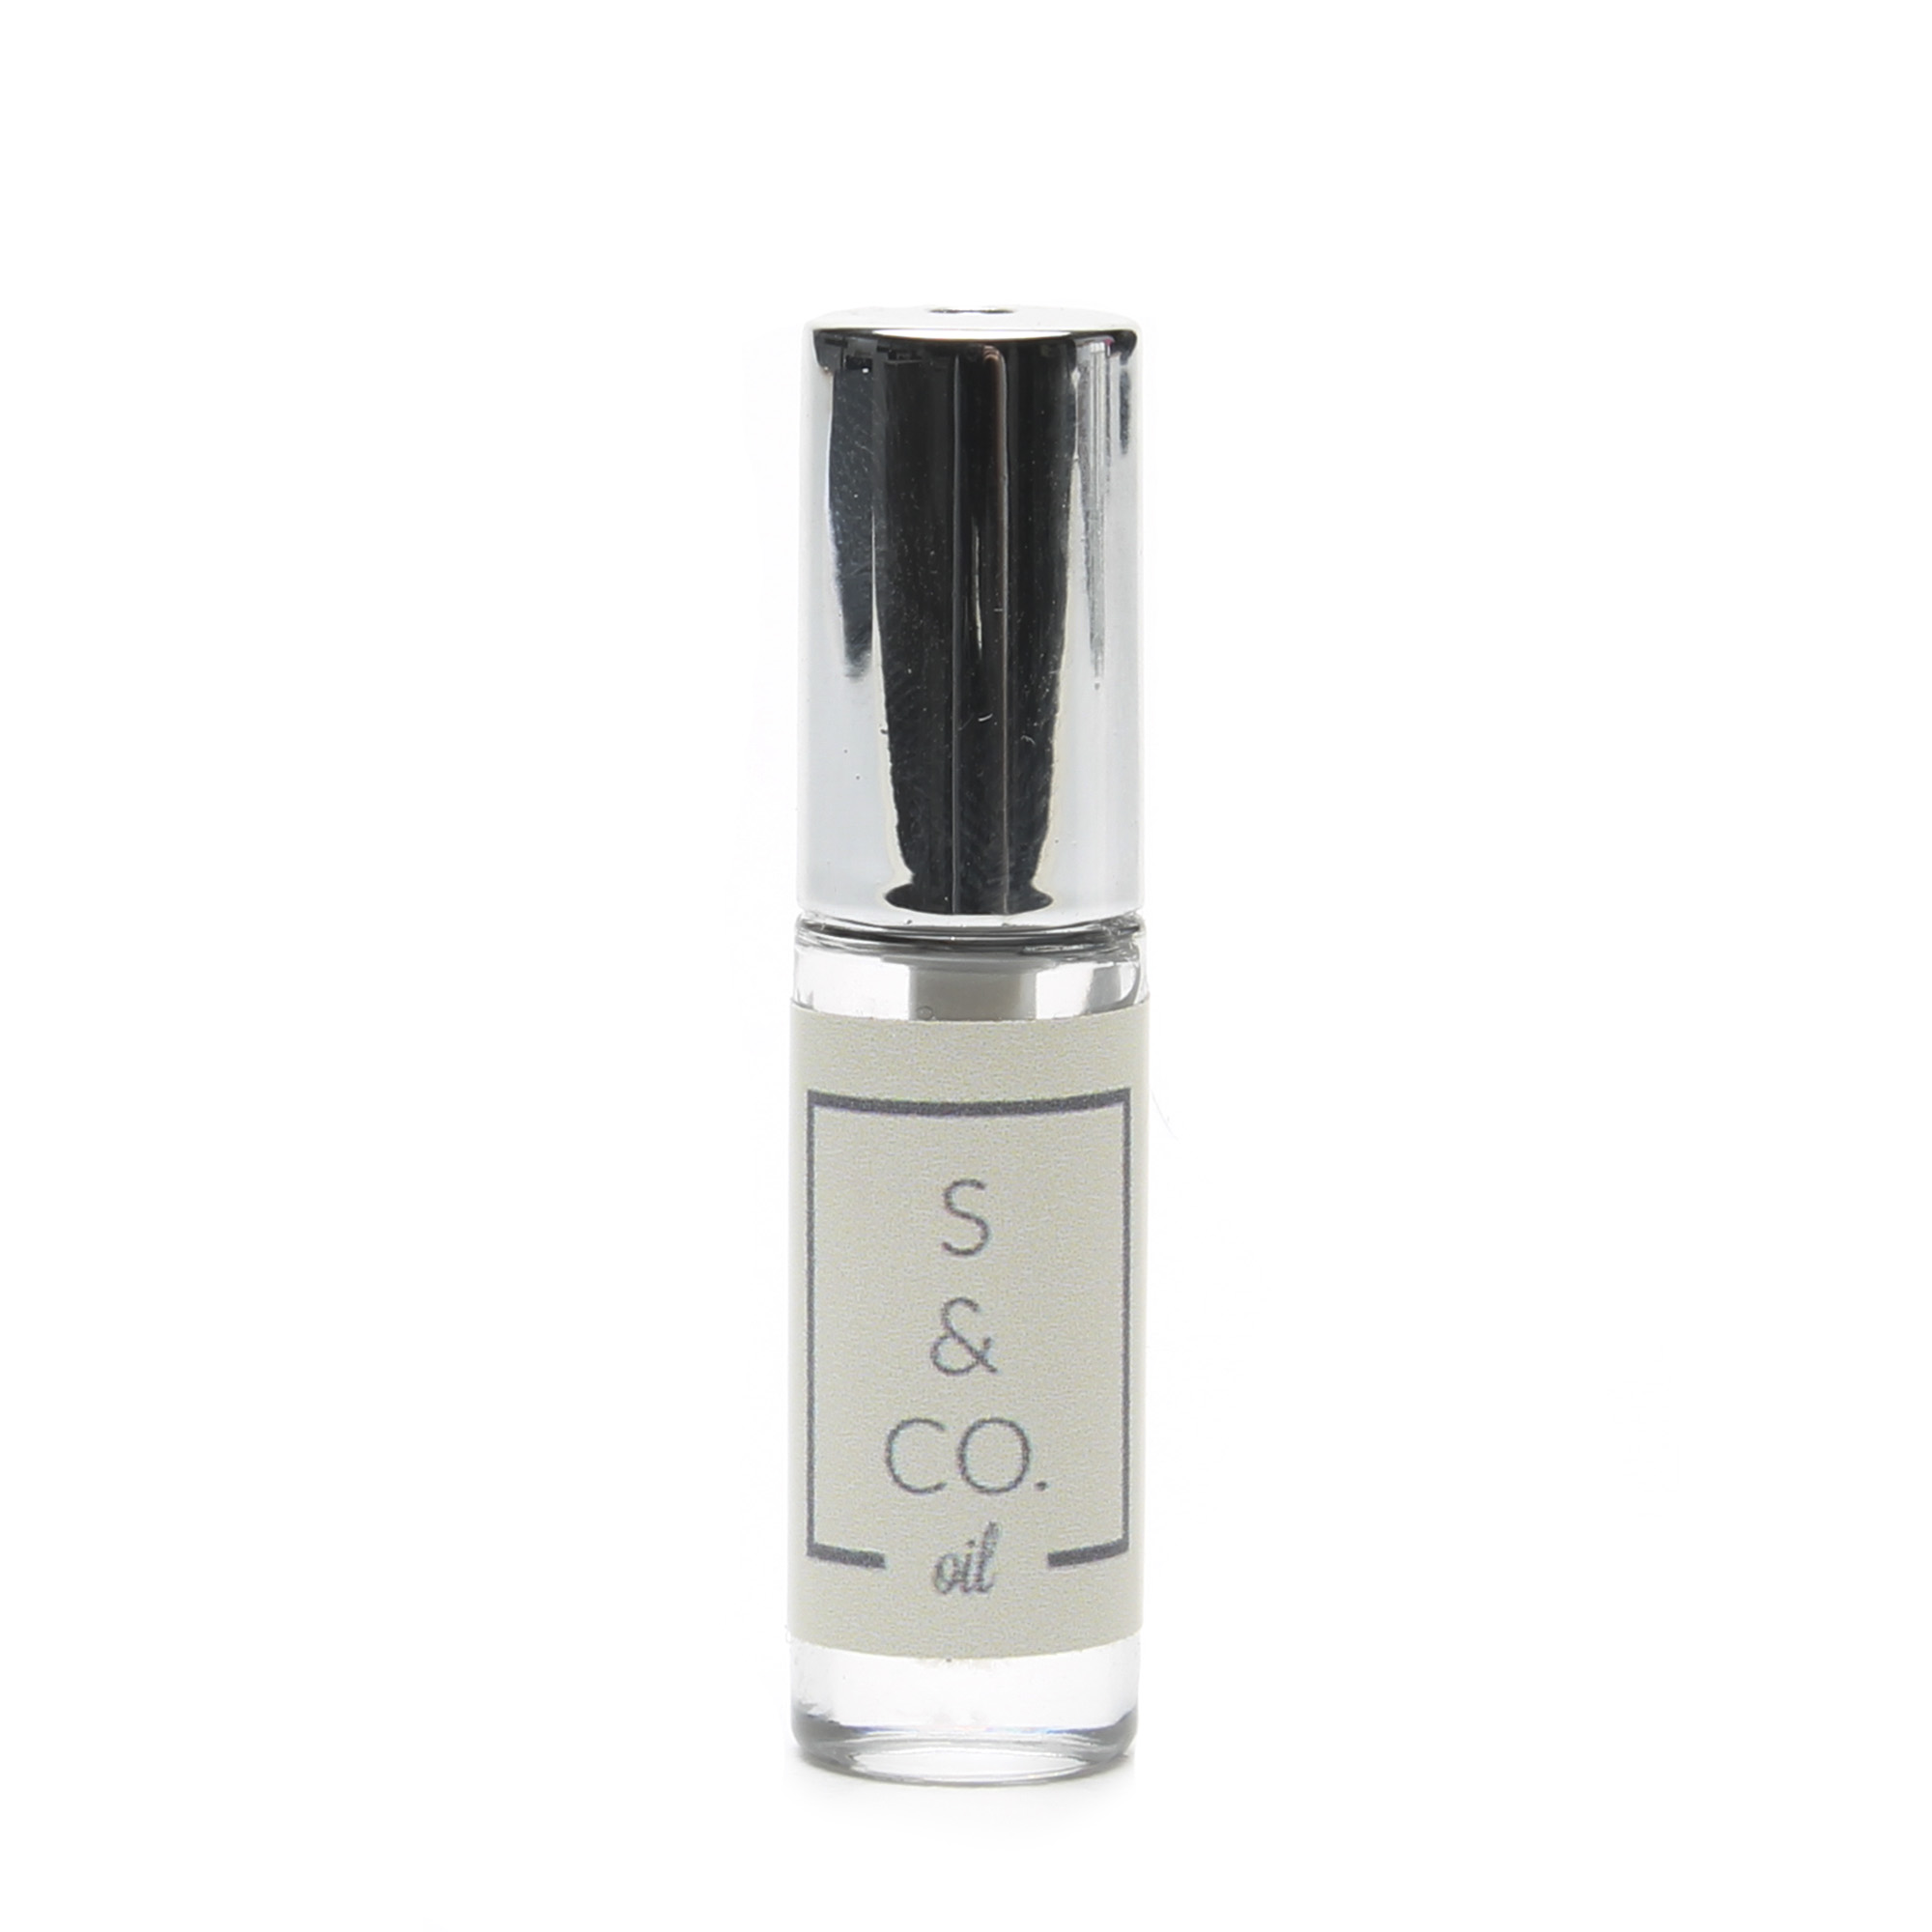 Sparkle & Co. 2 in 1 oil - Cuticle Oil and Rim Protector